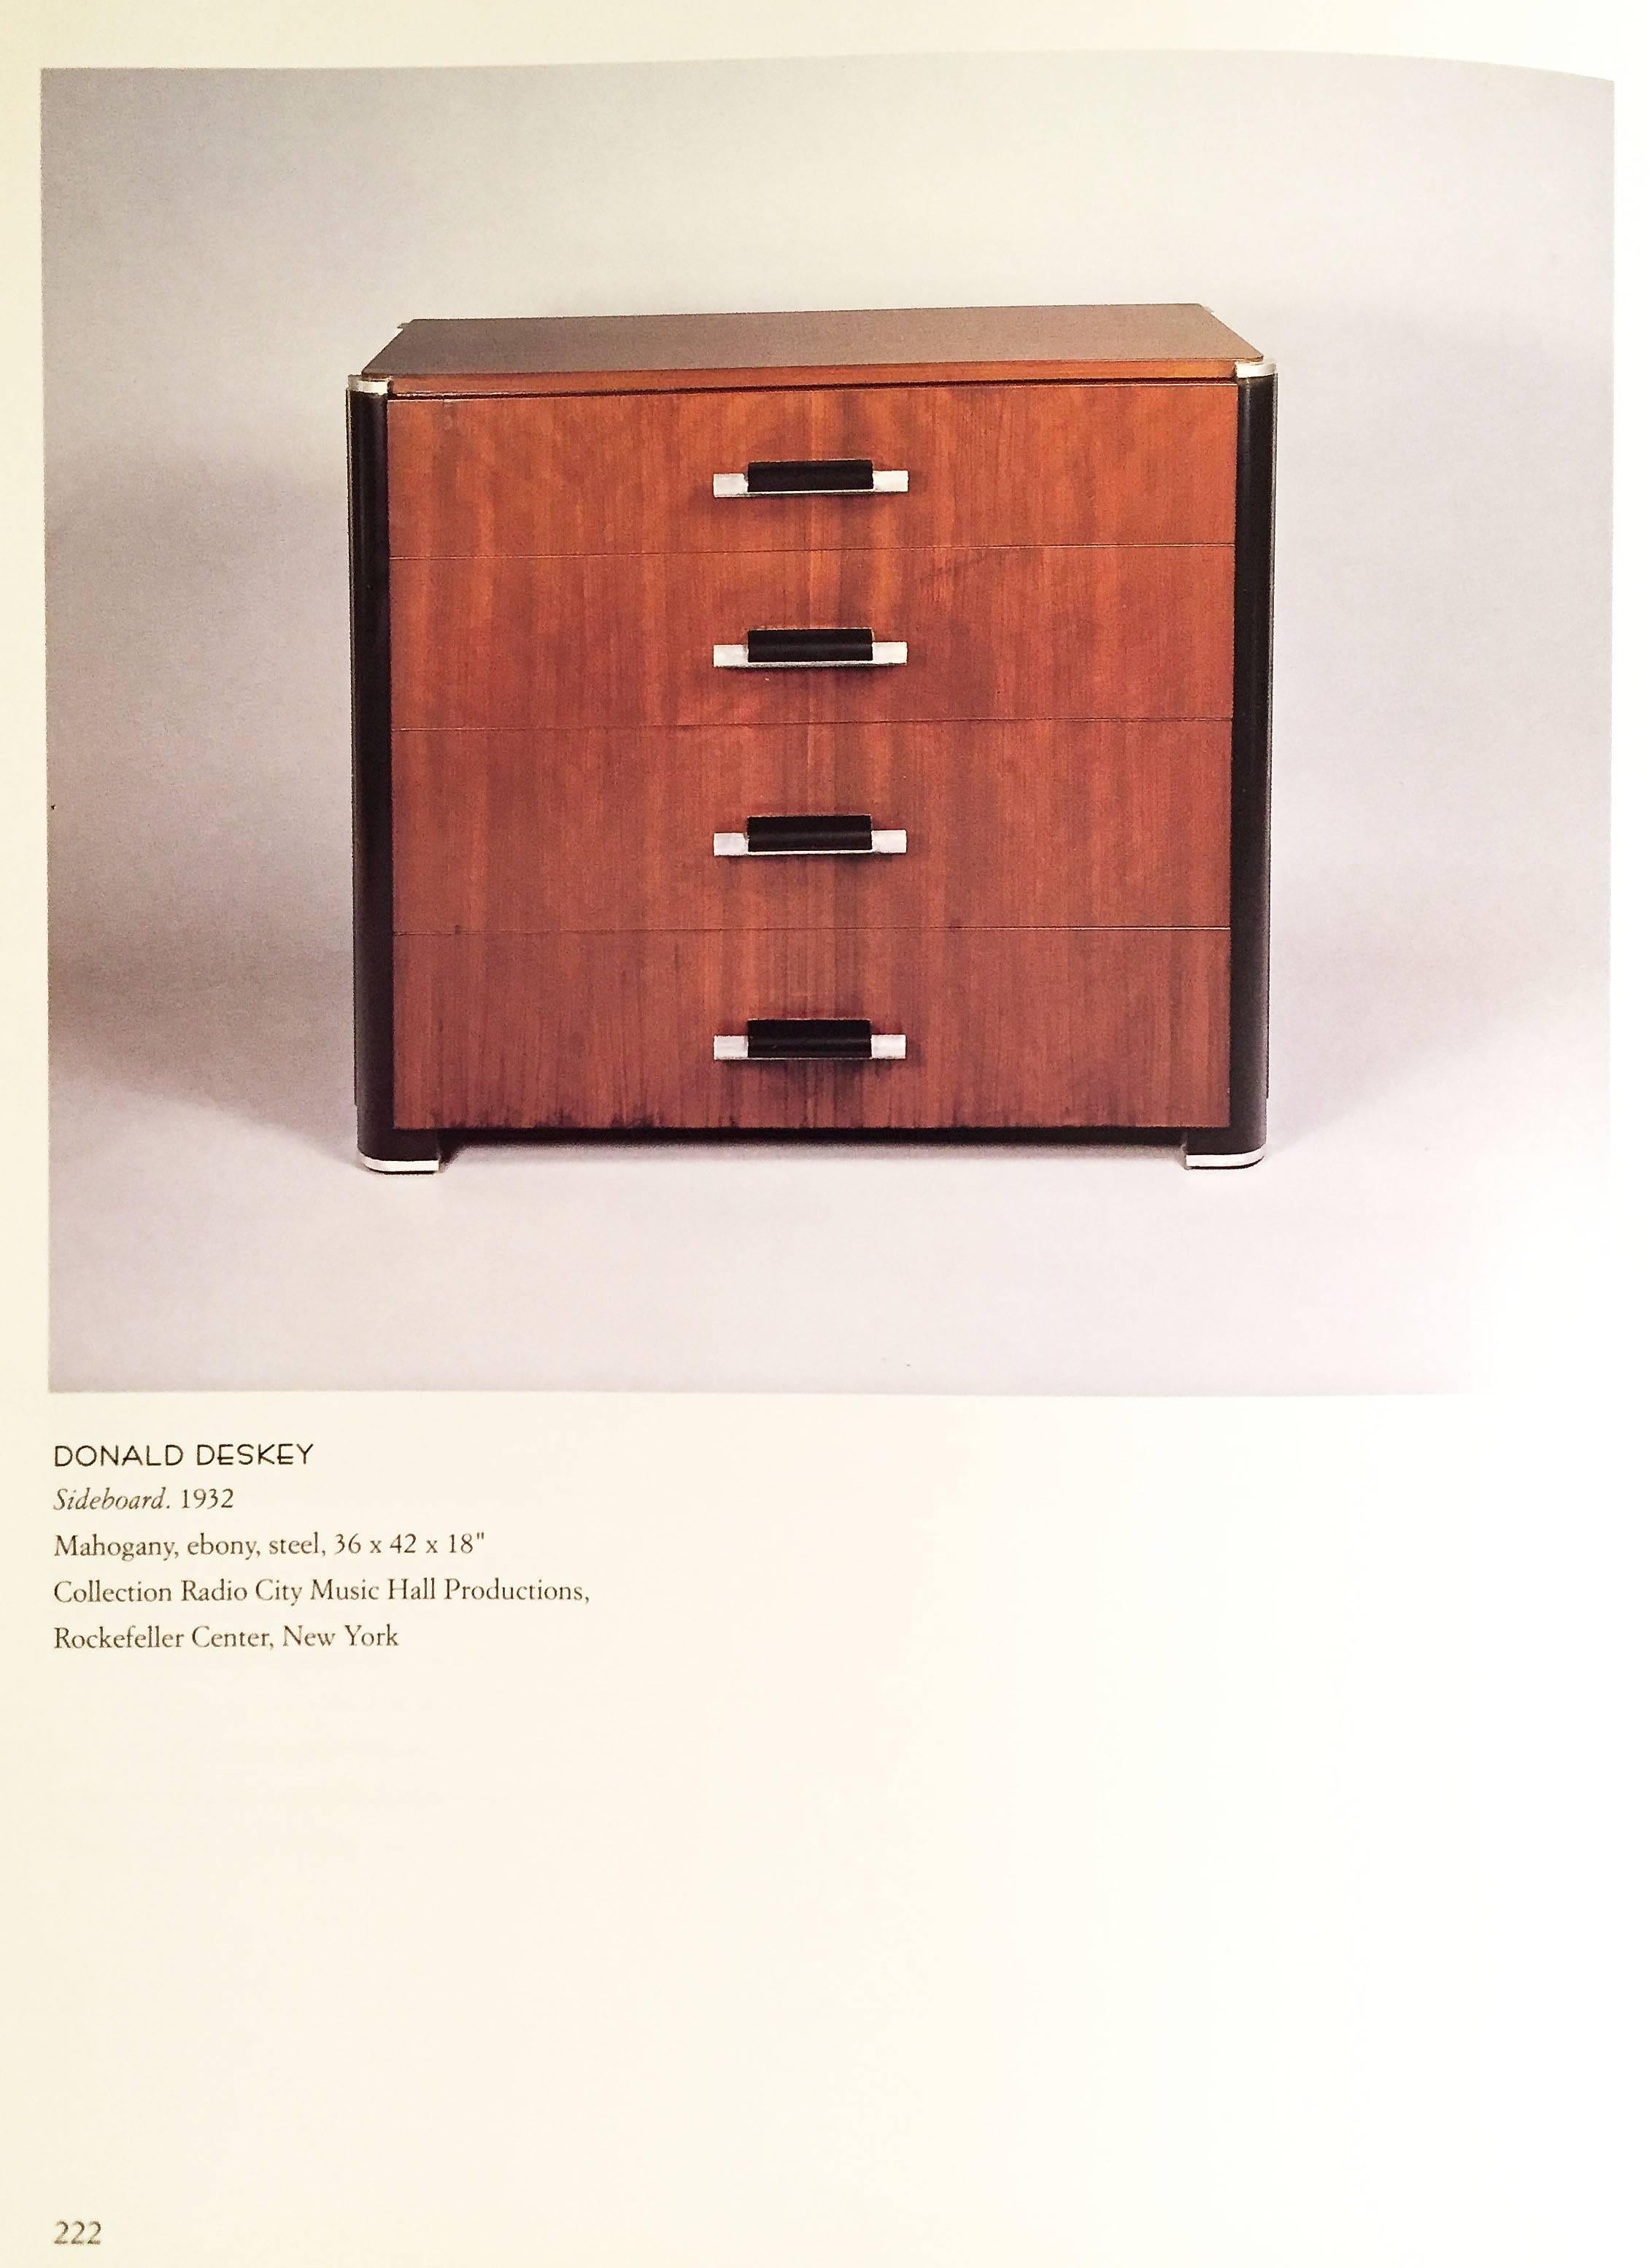 A superb example of this Donald Deskey Chest form. 
All original condition.
Valentine-Seaver Co, USA circa 1930.

Literature: Craft in the Machine Age, Kardon, pg. 222.

Measures: 30 W x 19.5 D x 50.25 H inches.